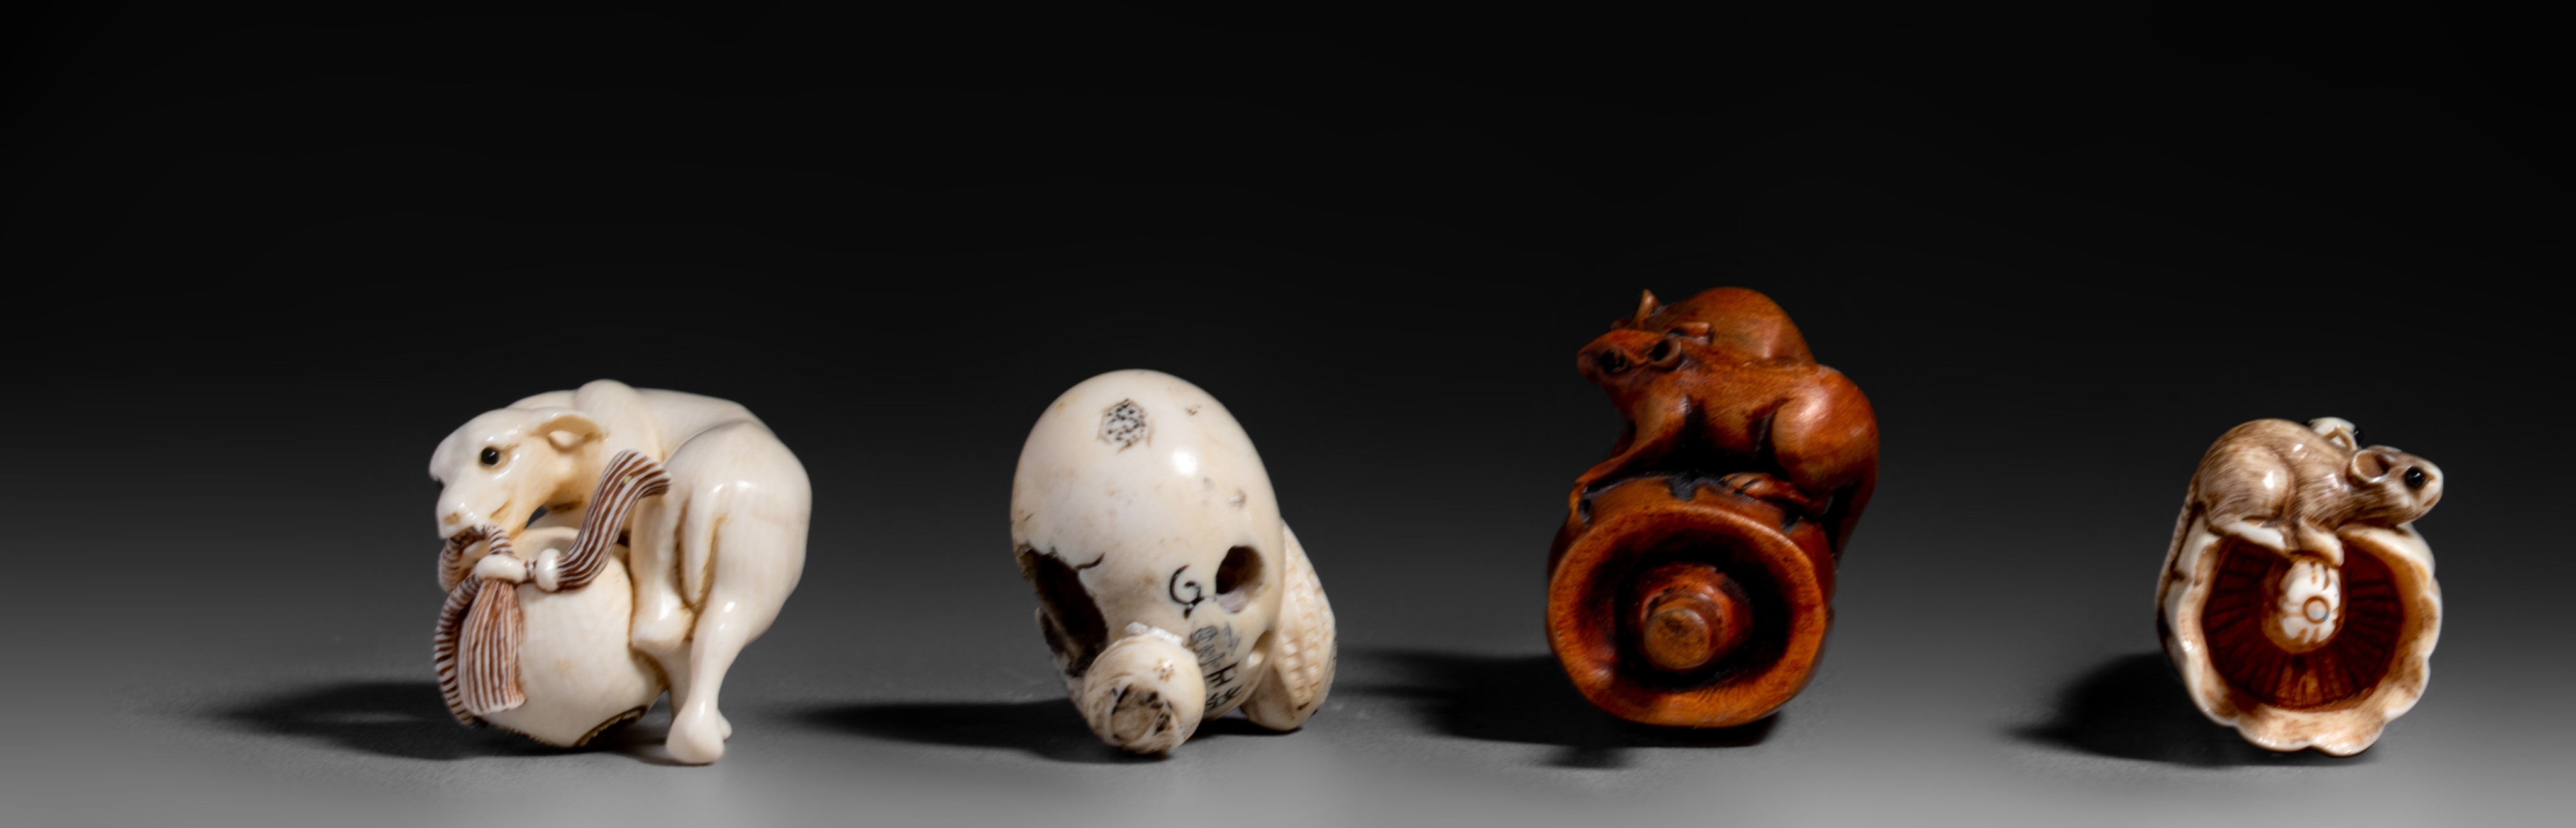 Two ivory netsuke and two ditto okimono, 19th/early 20thC, 25g - 16g - 44g - 24g (+) - Image 4 of 9